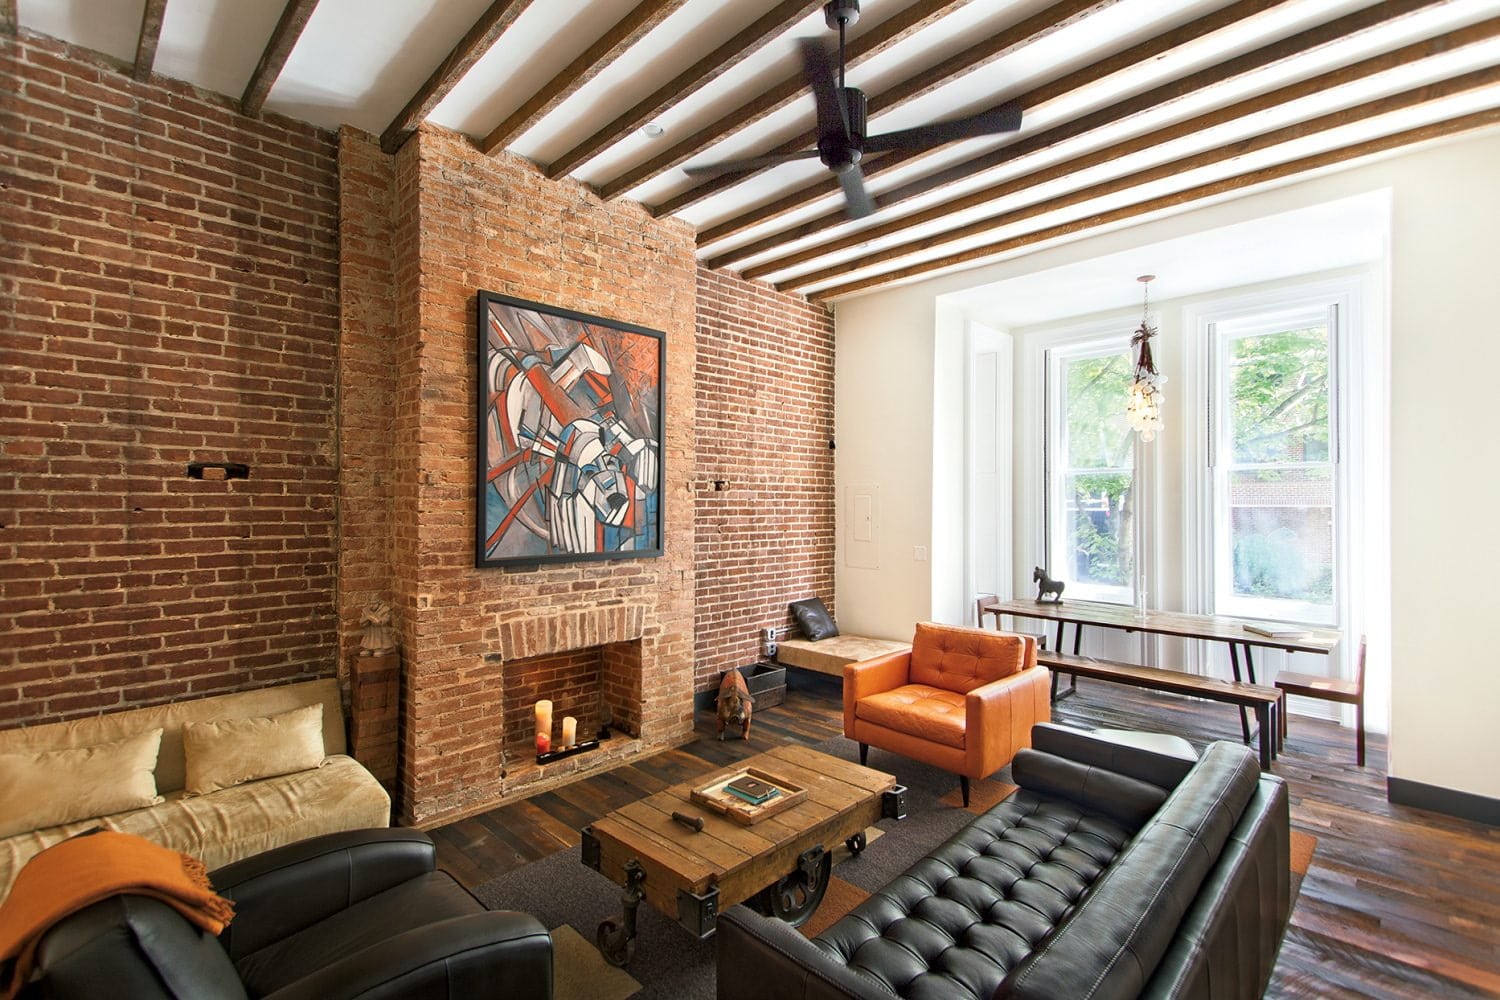 Usual brick laid wall with the fireplace and the open lattice of ceiling beams for modern loft living room